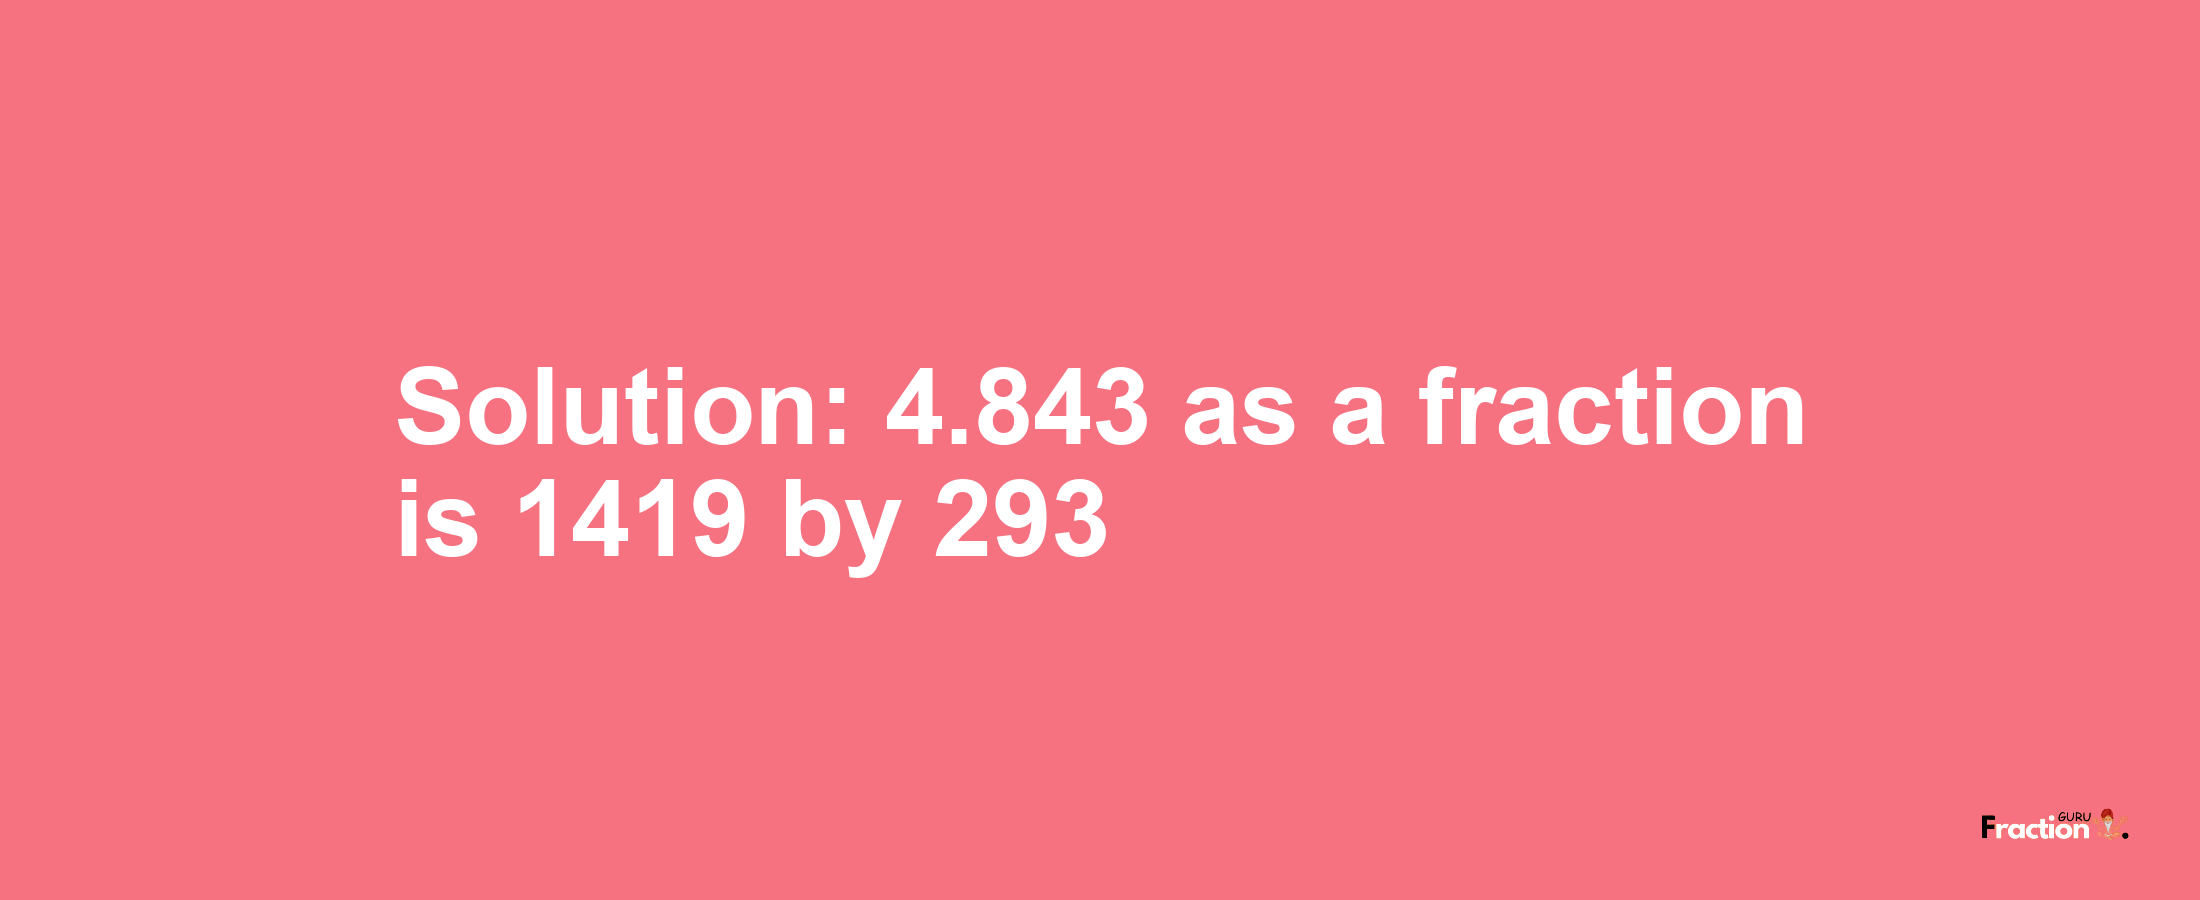 Solution:4.843 as a fraction is 1419/293